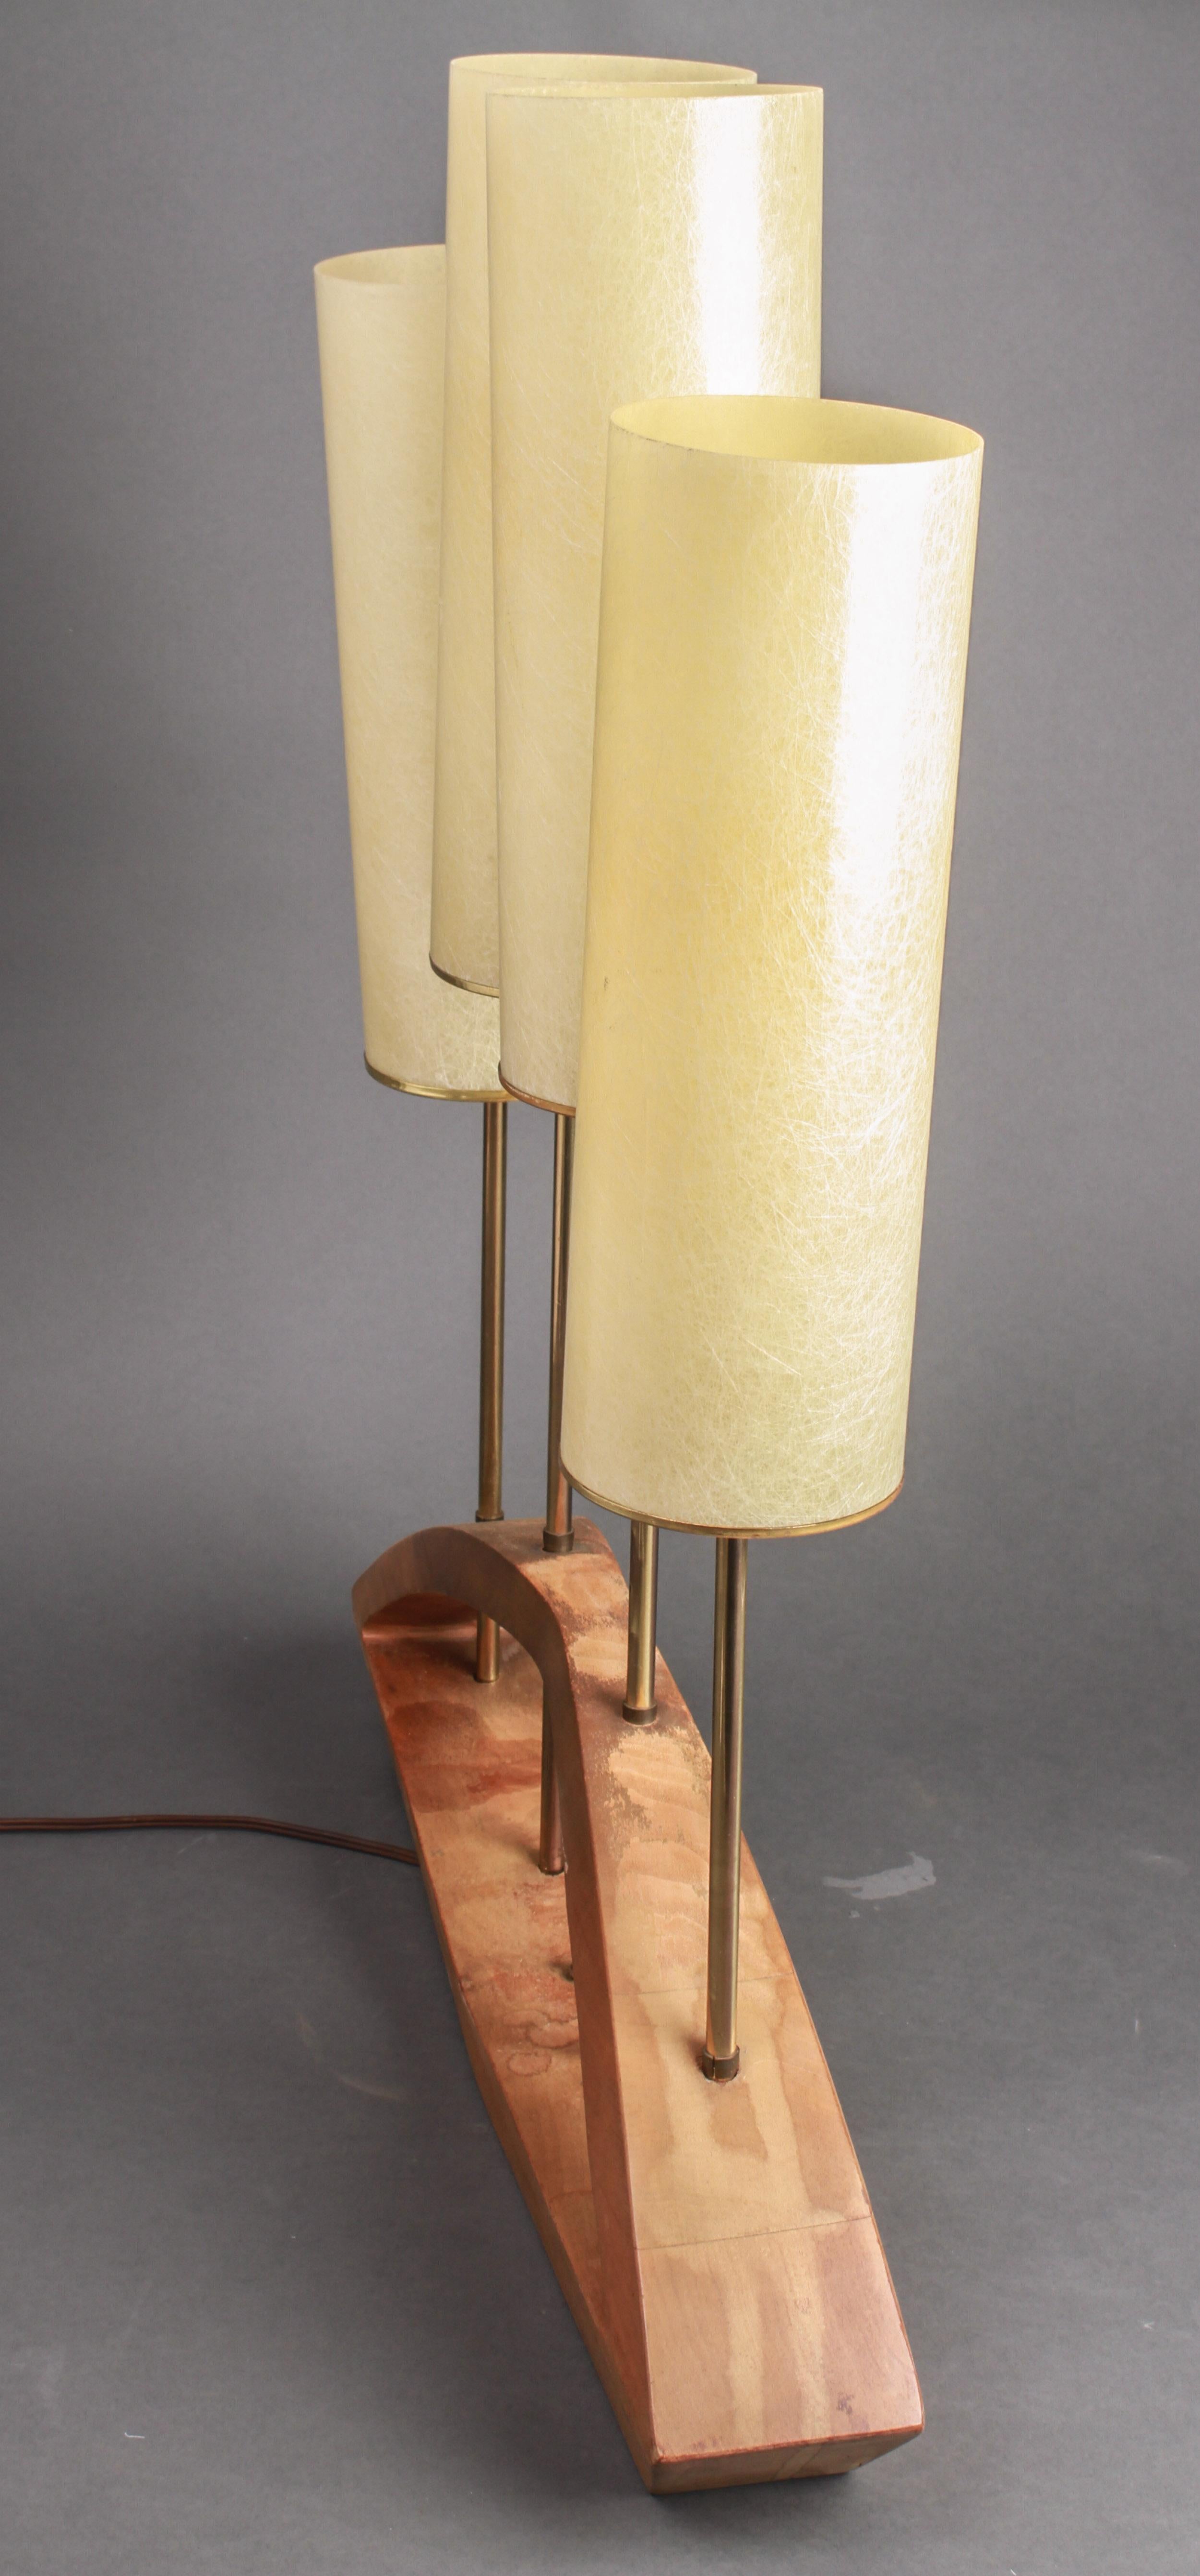 Mid-Century Modern four-light wooden candelabra manner table lamp. The piece has an arched form pierced by four vertical brass standards, each with a tall resin cylindrical shade. In great vintage condition with age-appropriate wear.